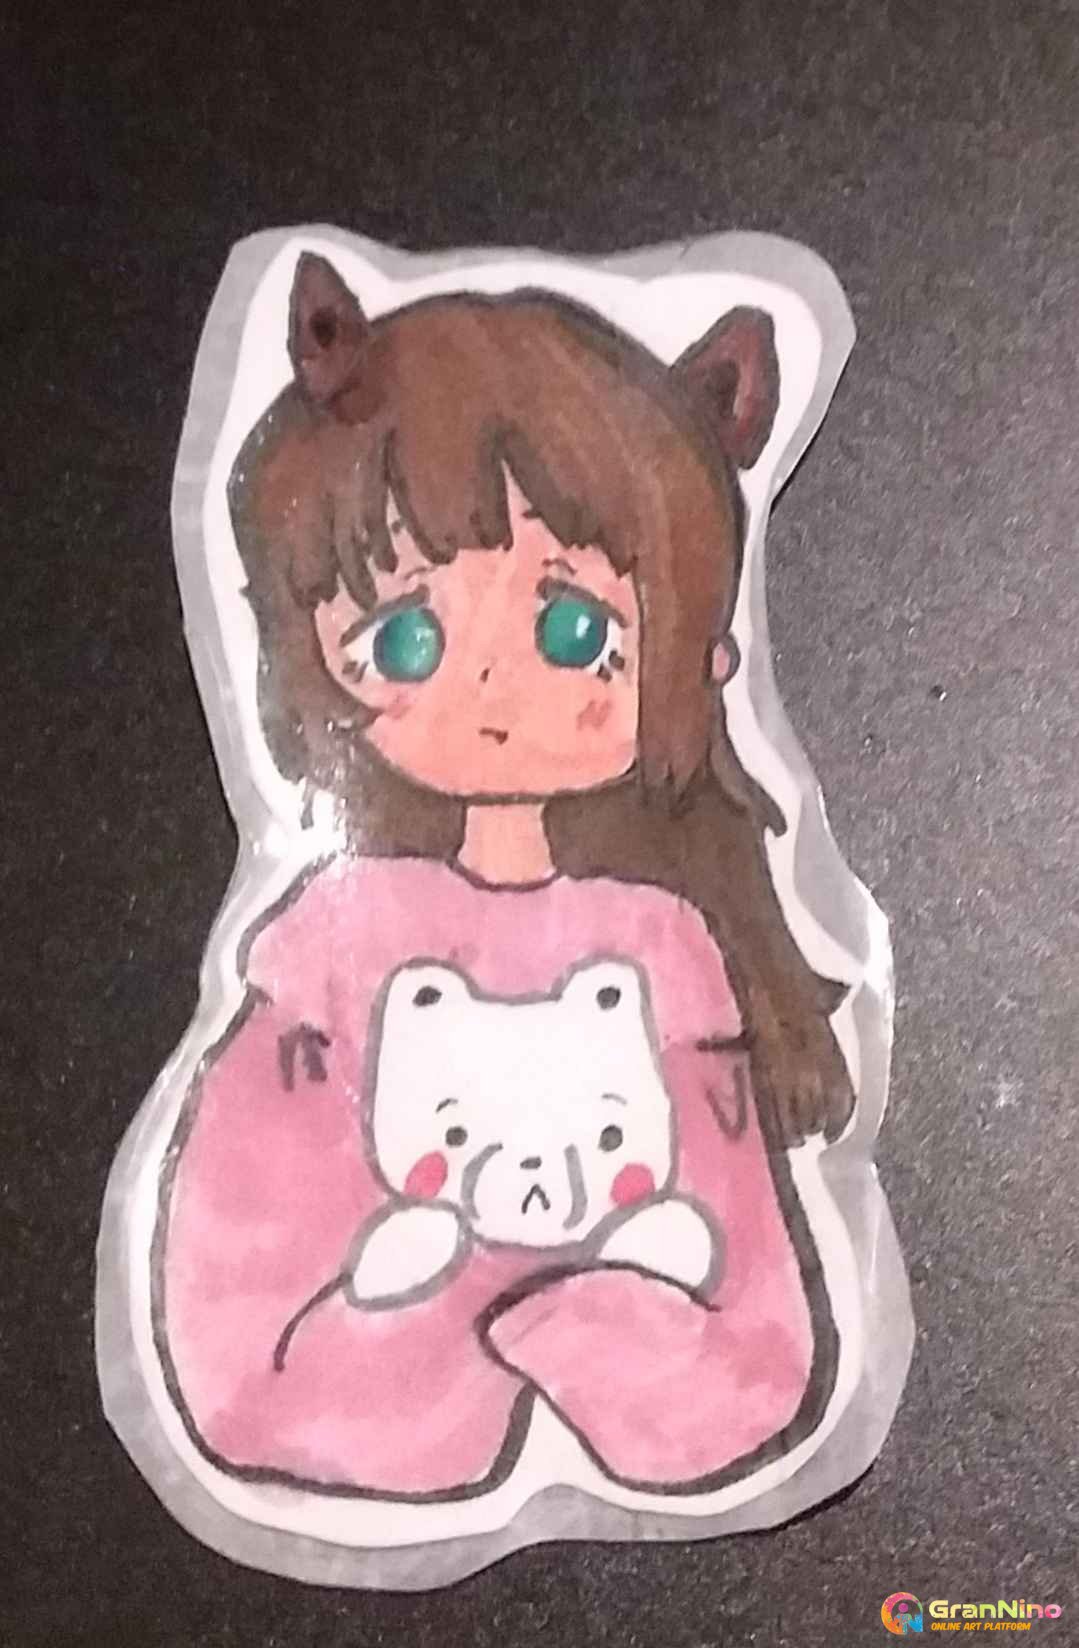 This Is A Chibi Girl Holding A Teddy Bear Sticker It Can